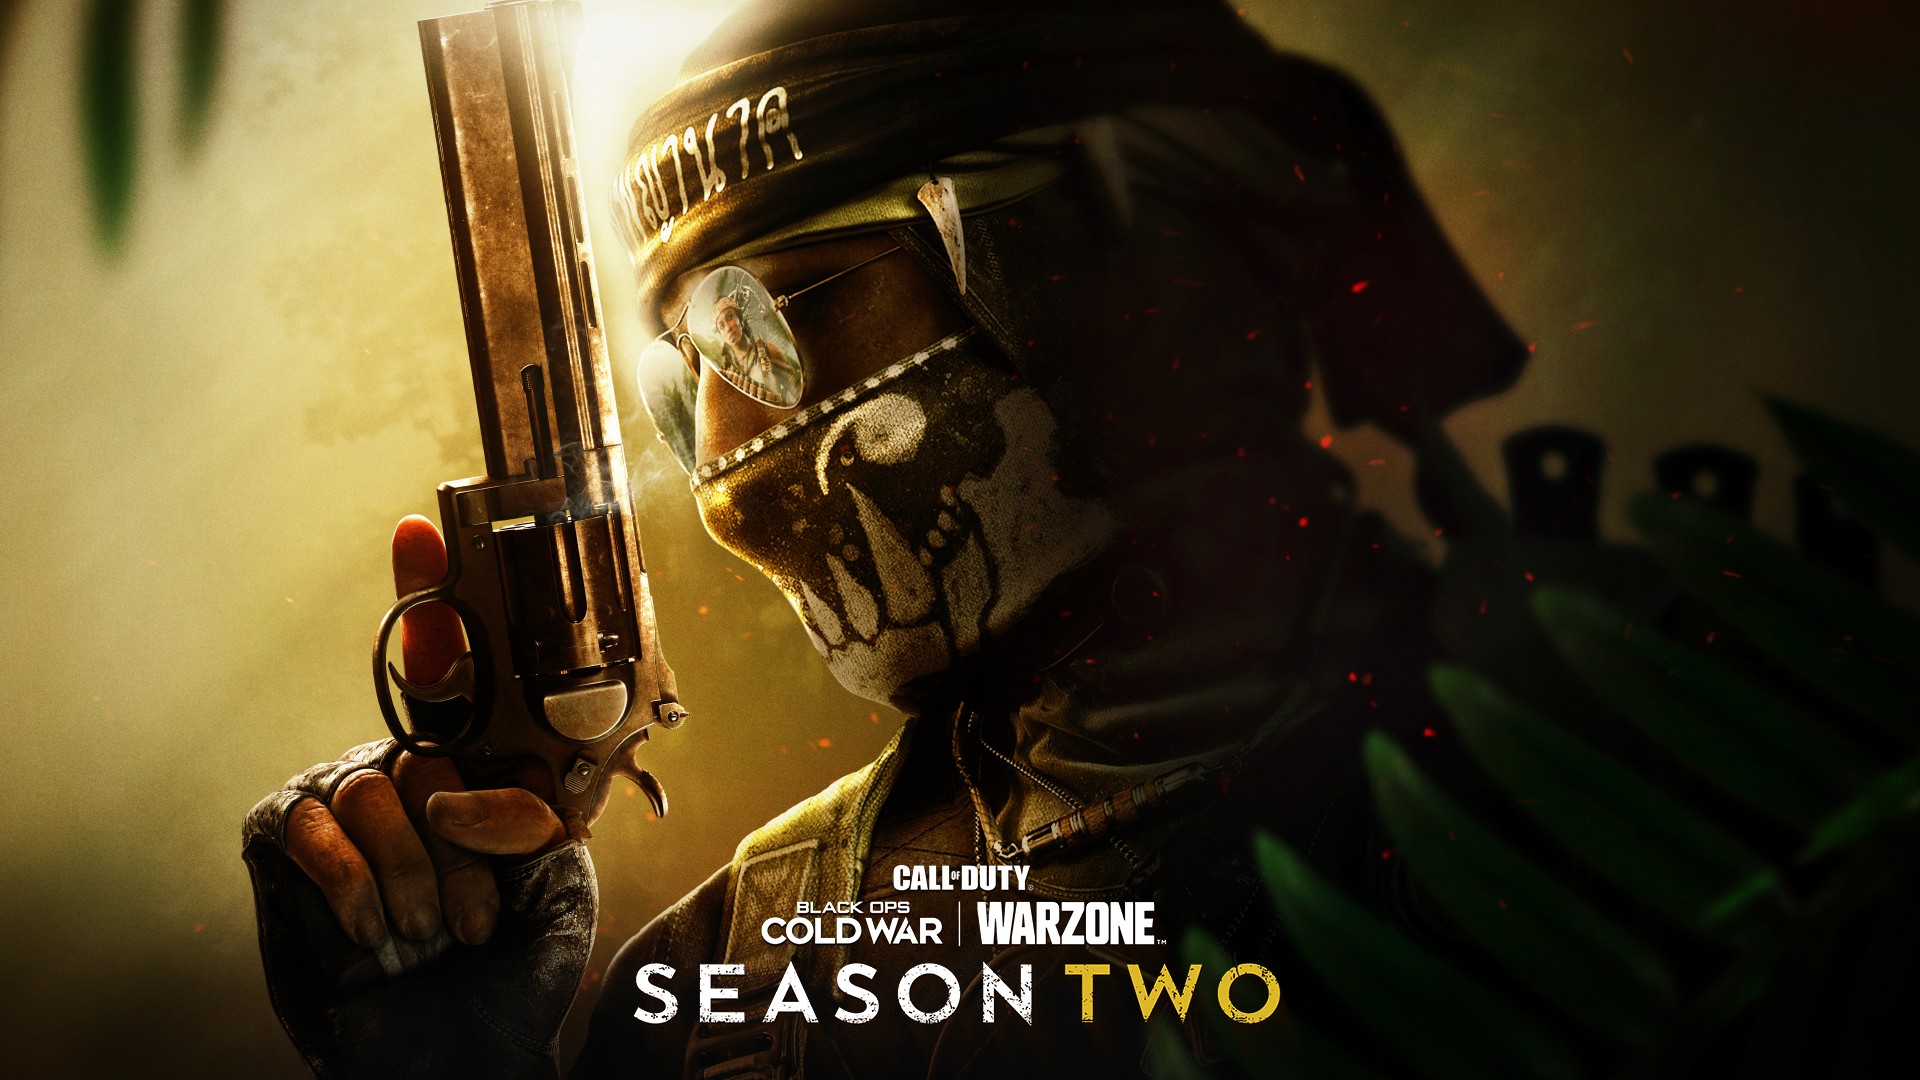 Call of Duty: Black Ops Cold War and Warzone Season Two Begin February 25